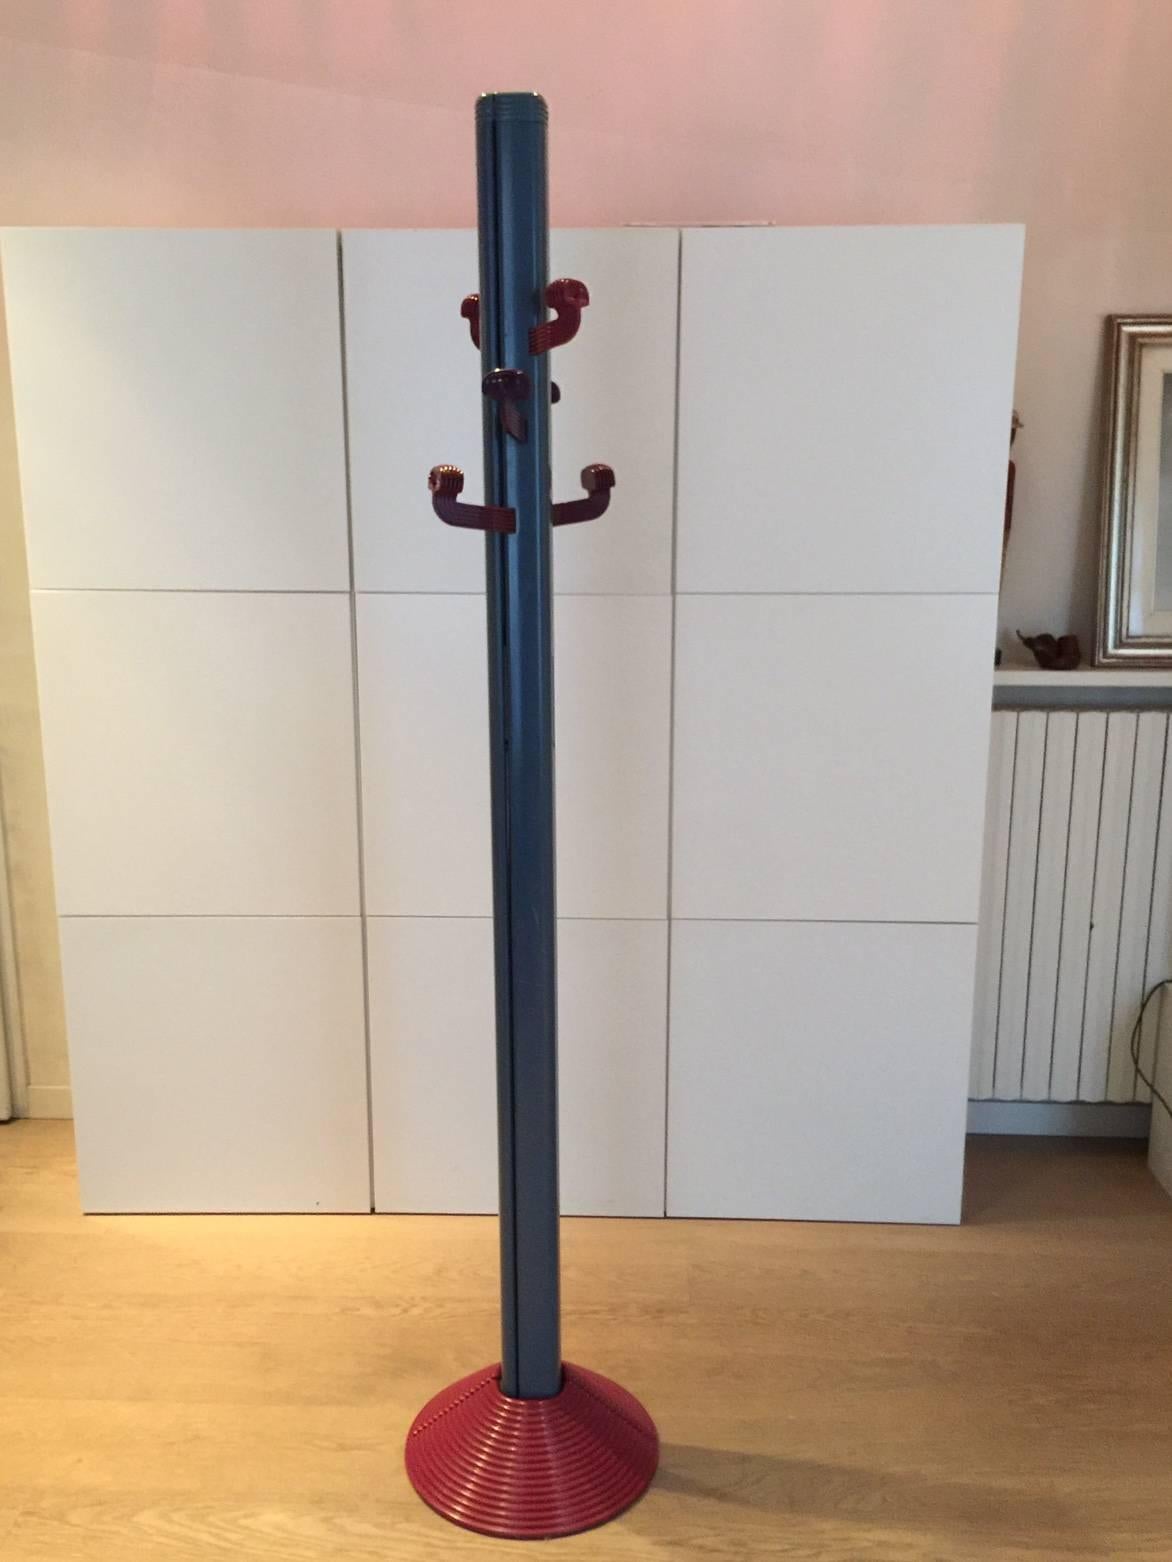 Amazing Giancarlo Piretti design "Dilemma" coat rack and ladder, 1984 for Castilla , Bologna Italy. Perfect conditions. H. 198 cm; D. 40 cm; as ladder: H. 186.5 x 69 x 90 cm.